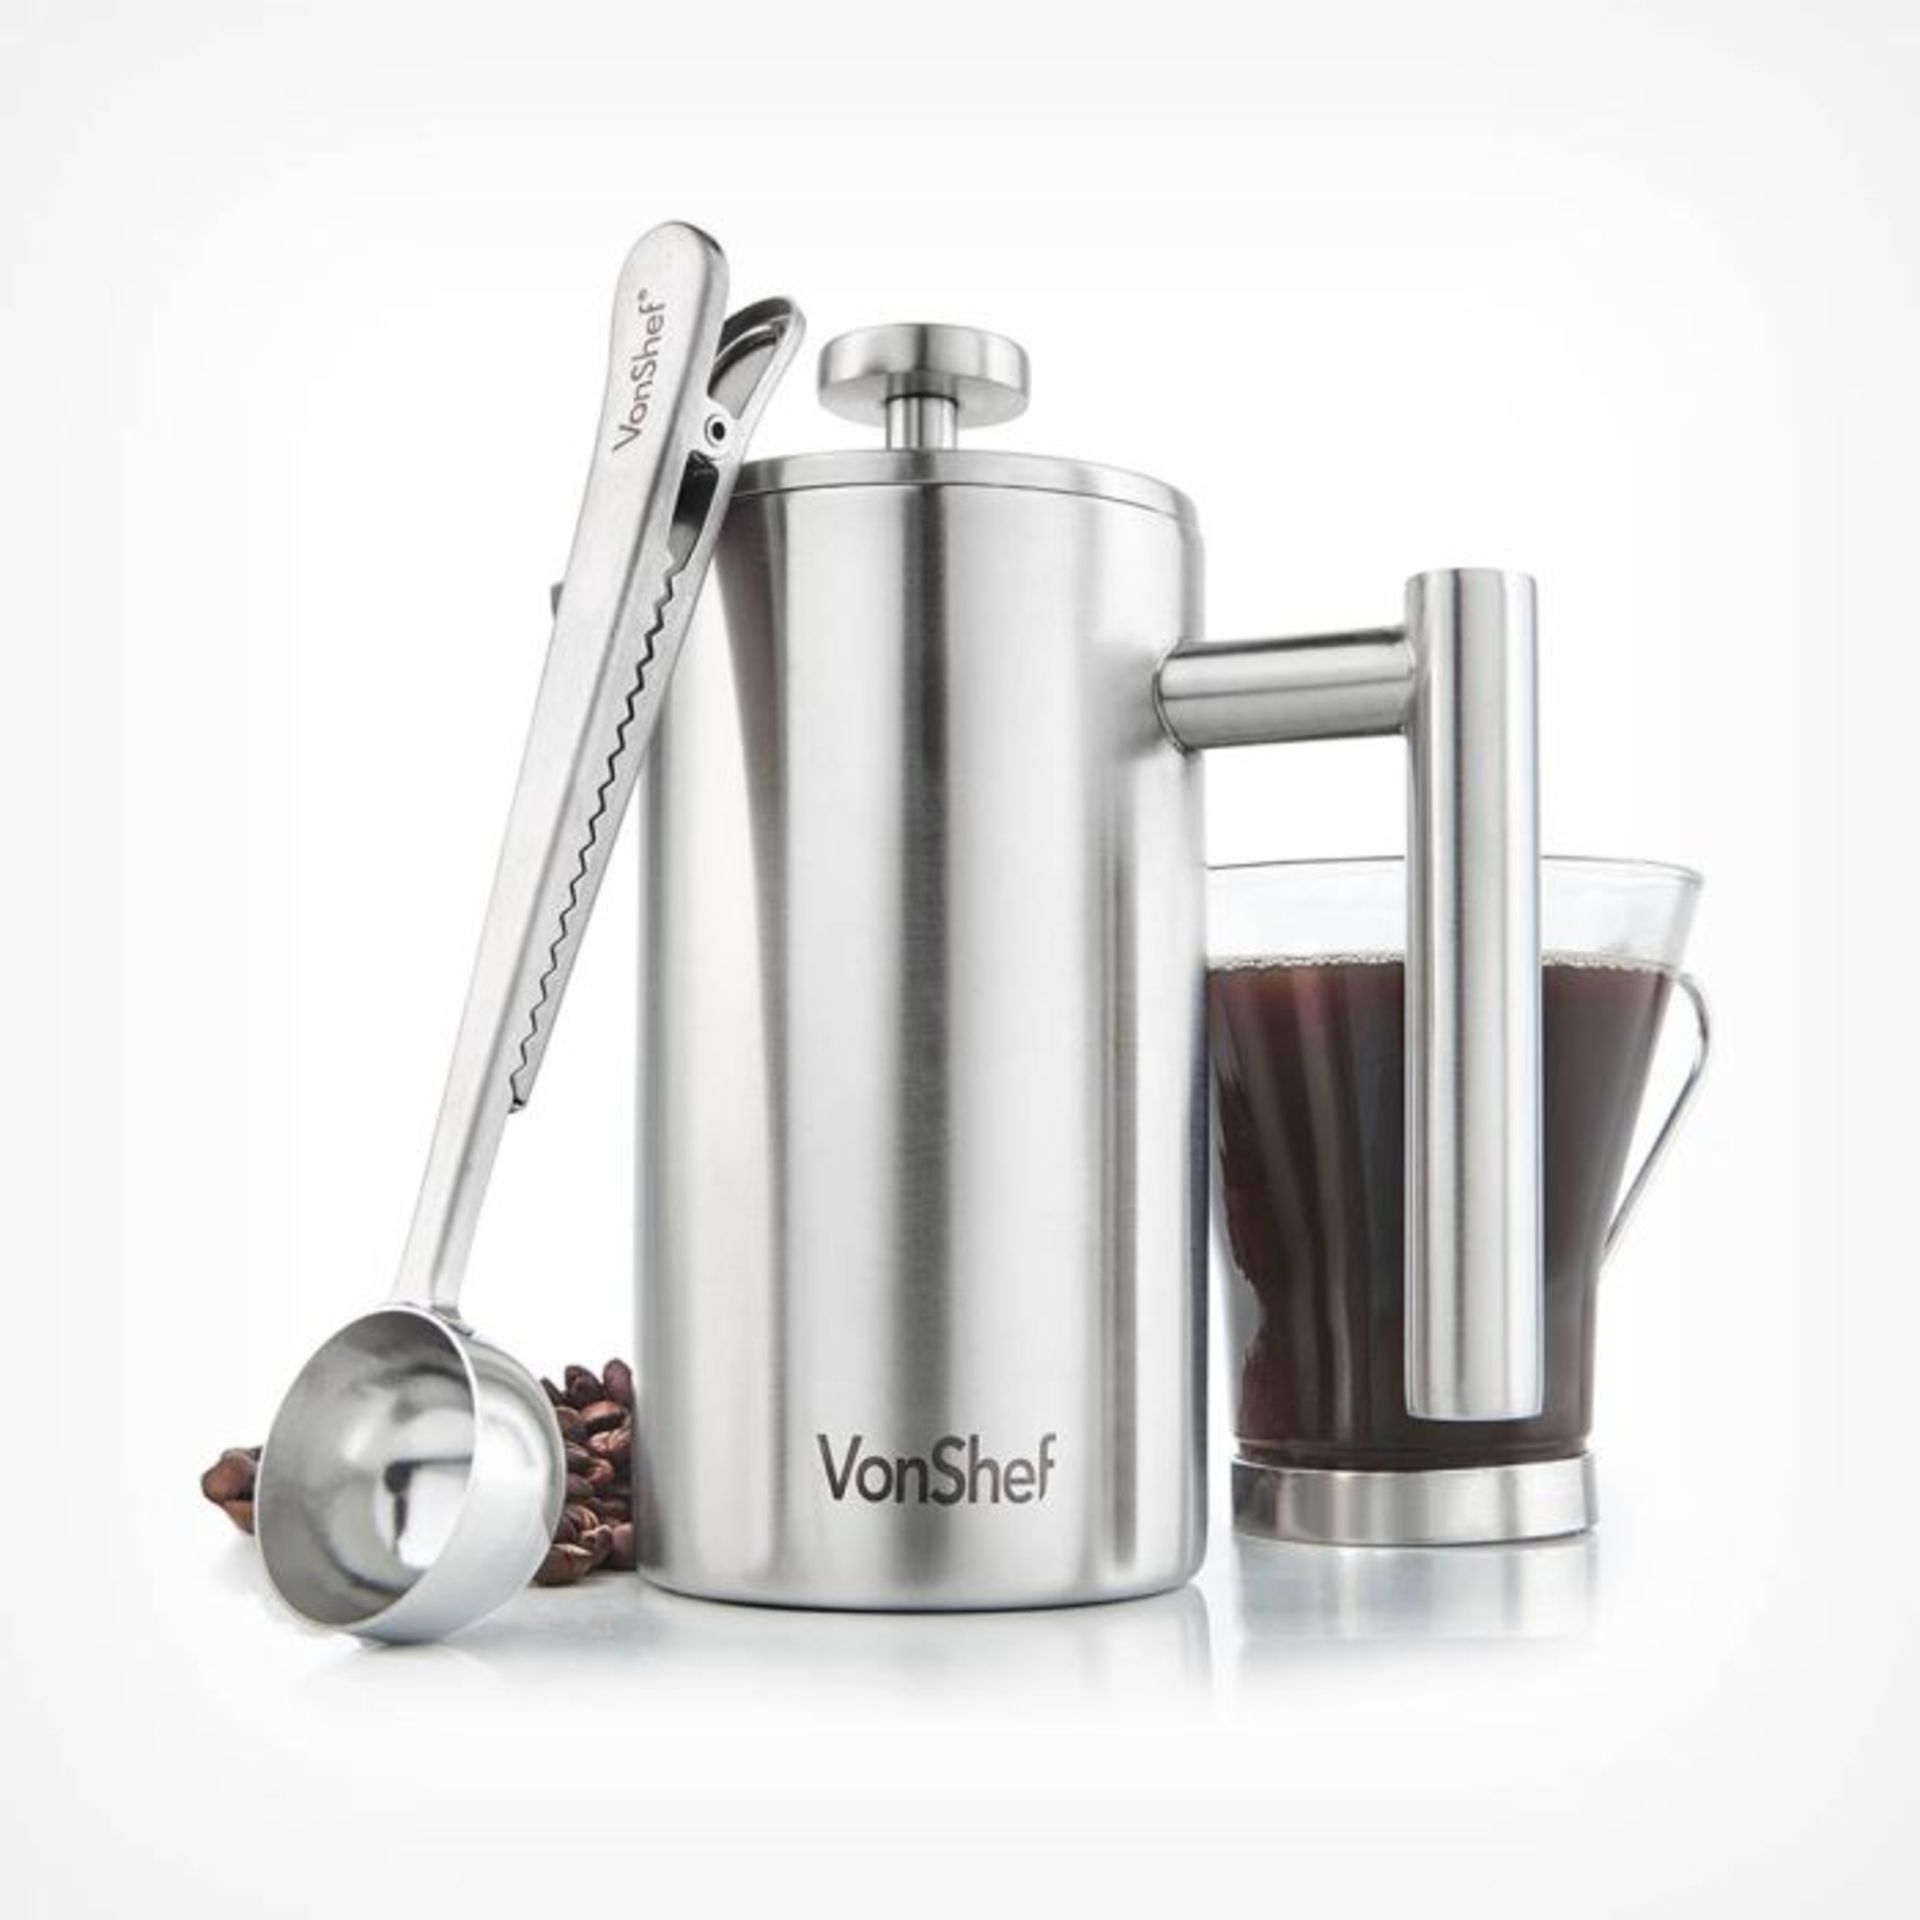 3 Cup Cafetiere with Spoon. - PW. In just 4 minutes your coffee will be ready to filter - use the